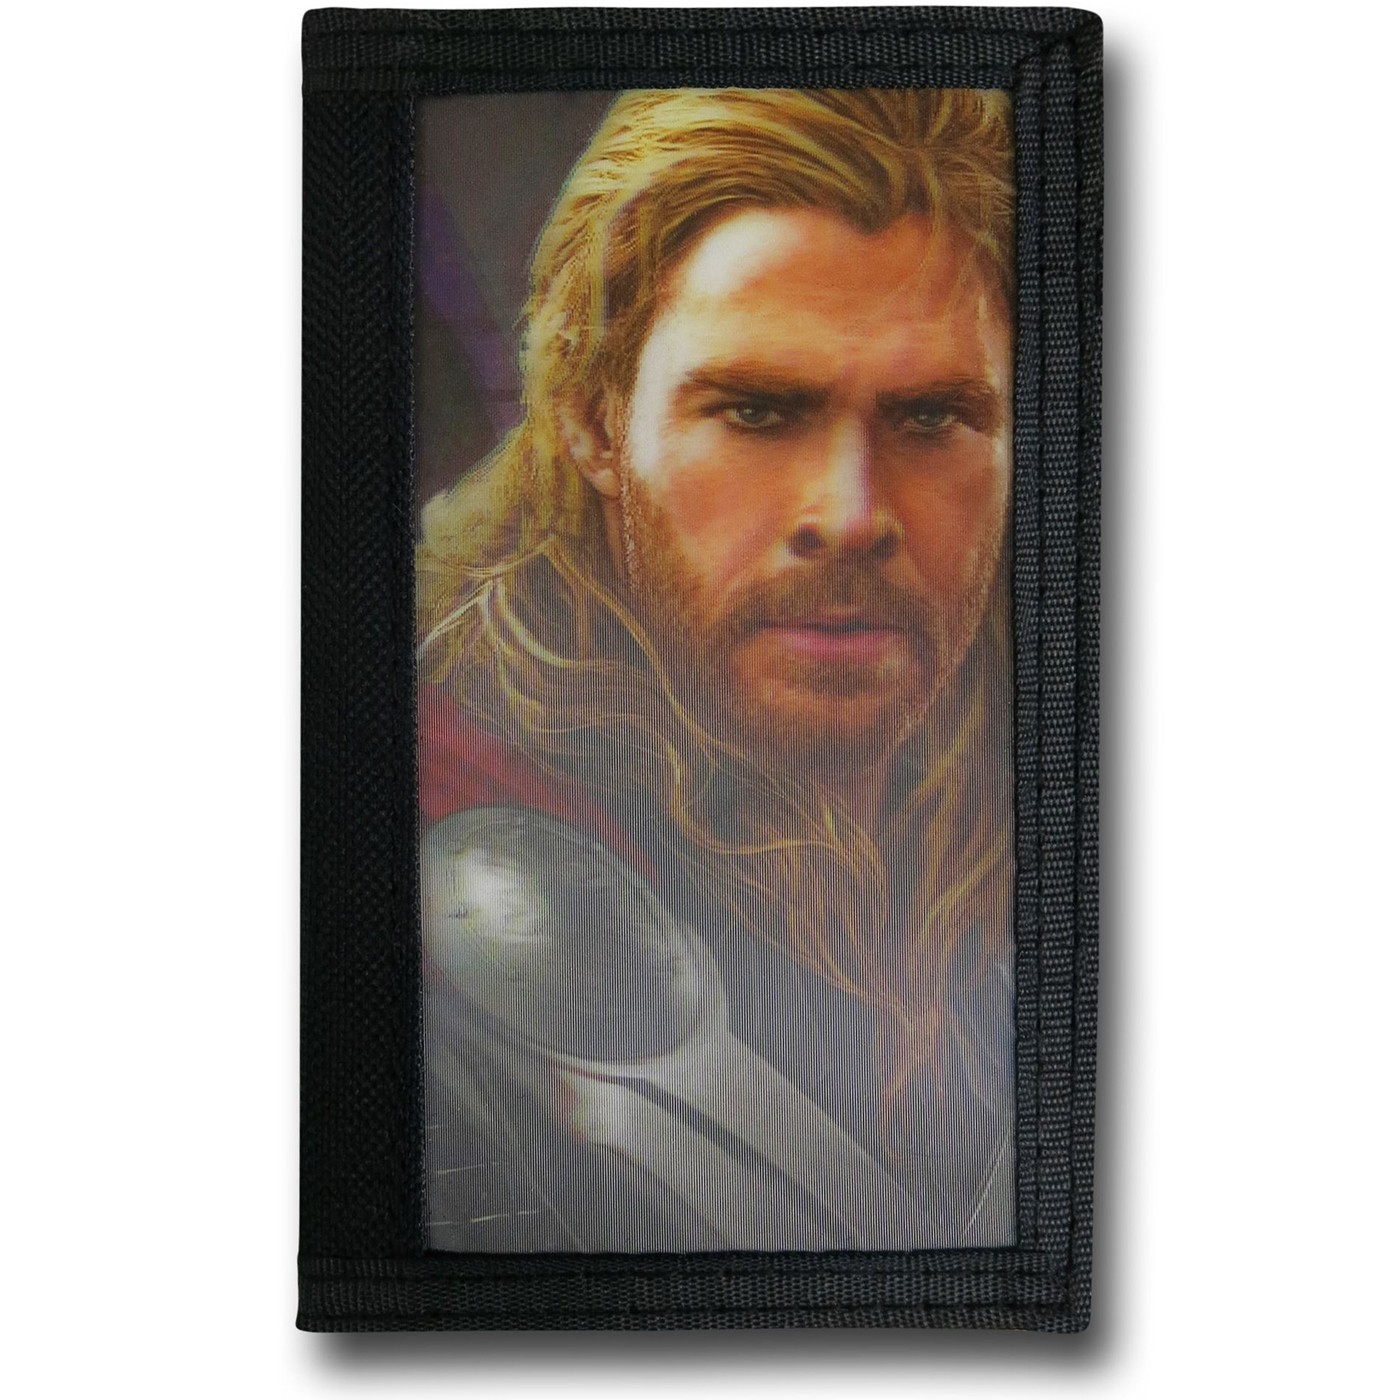 Thor Age of Ultron Lenticular Velcro Wallet